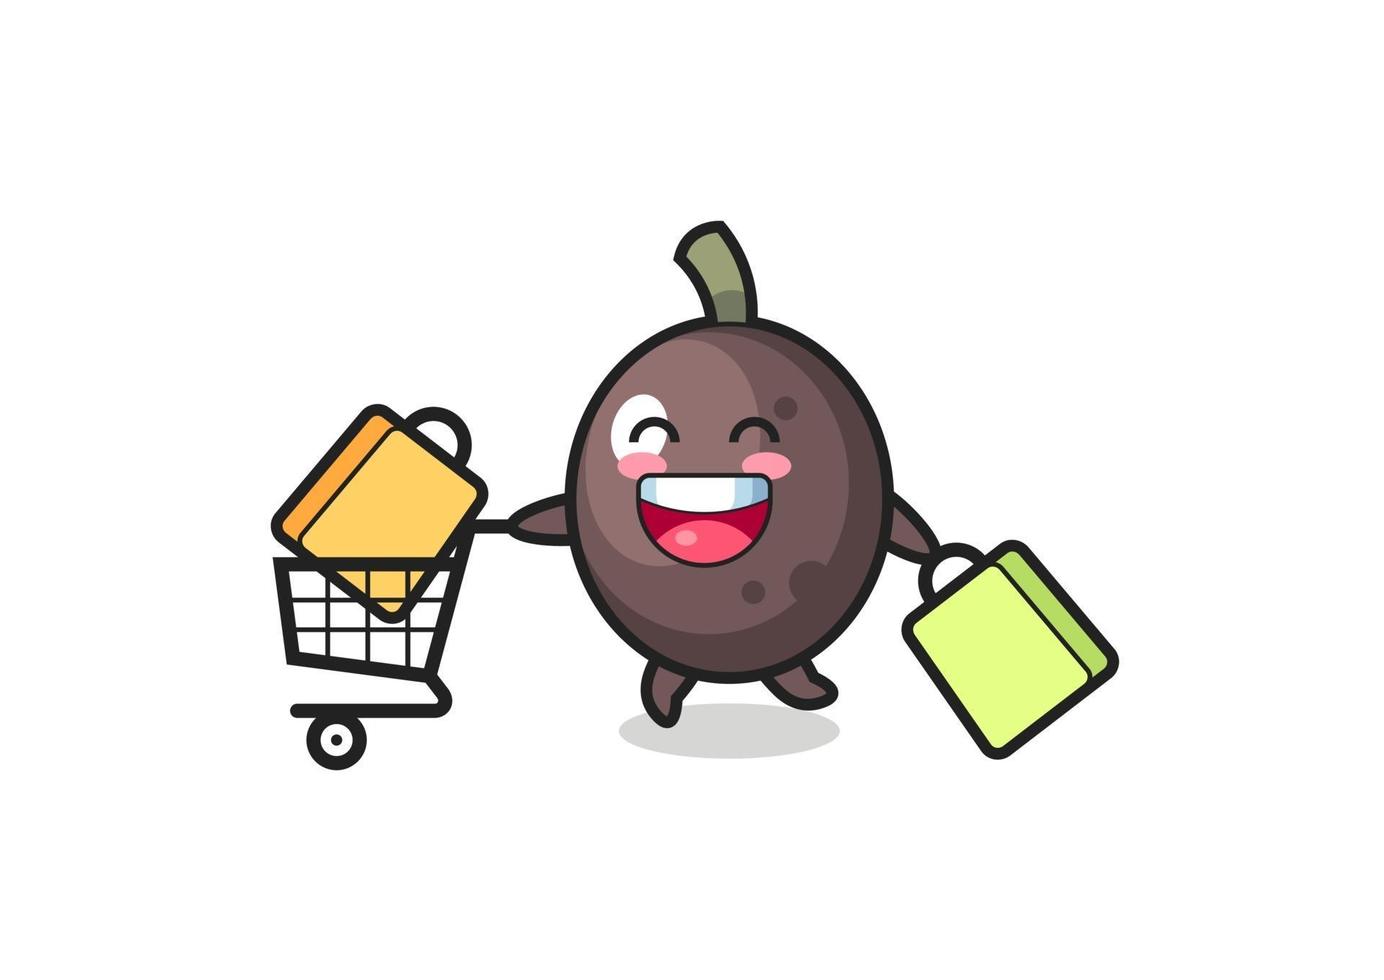 black Friday illustration with cute black olive mascot vector